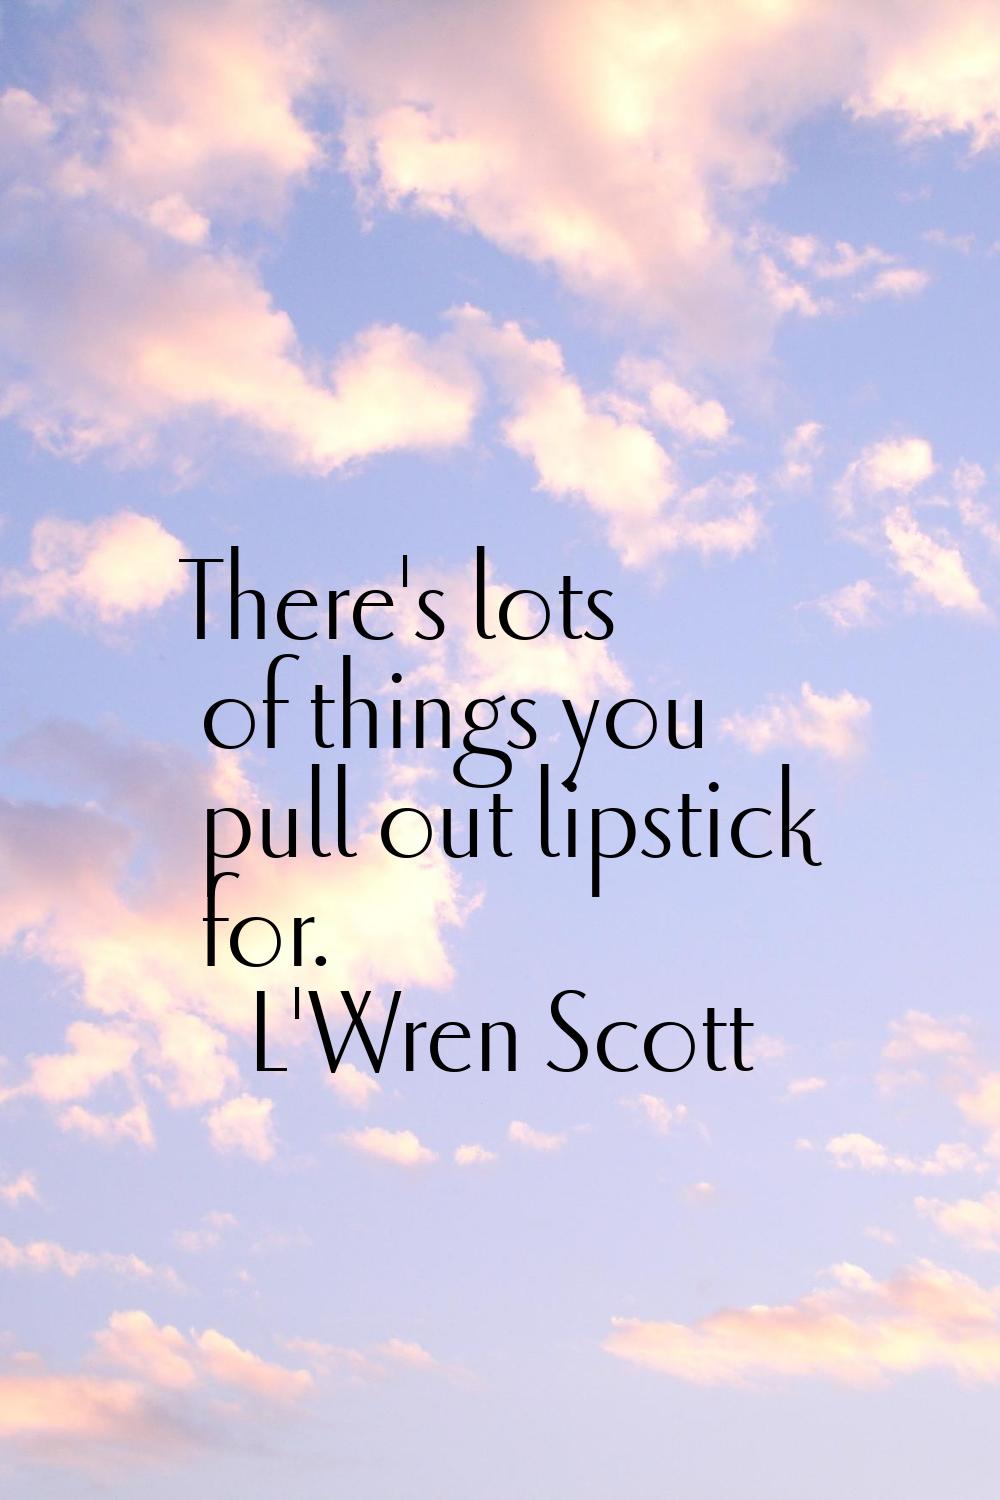 There's lots of things you pull out lipstick for.